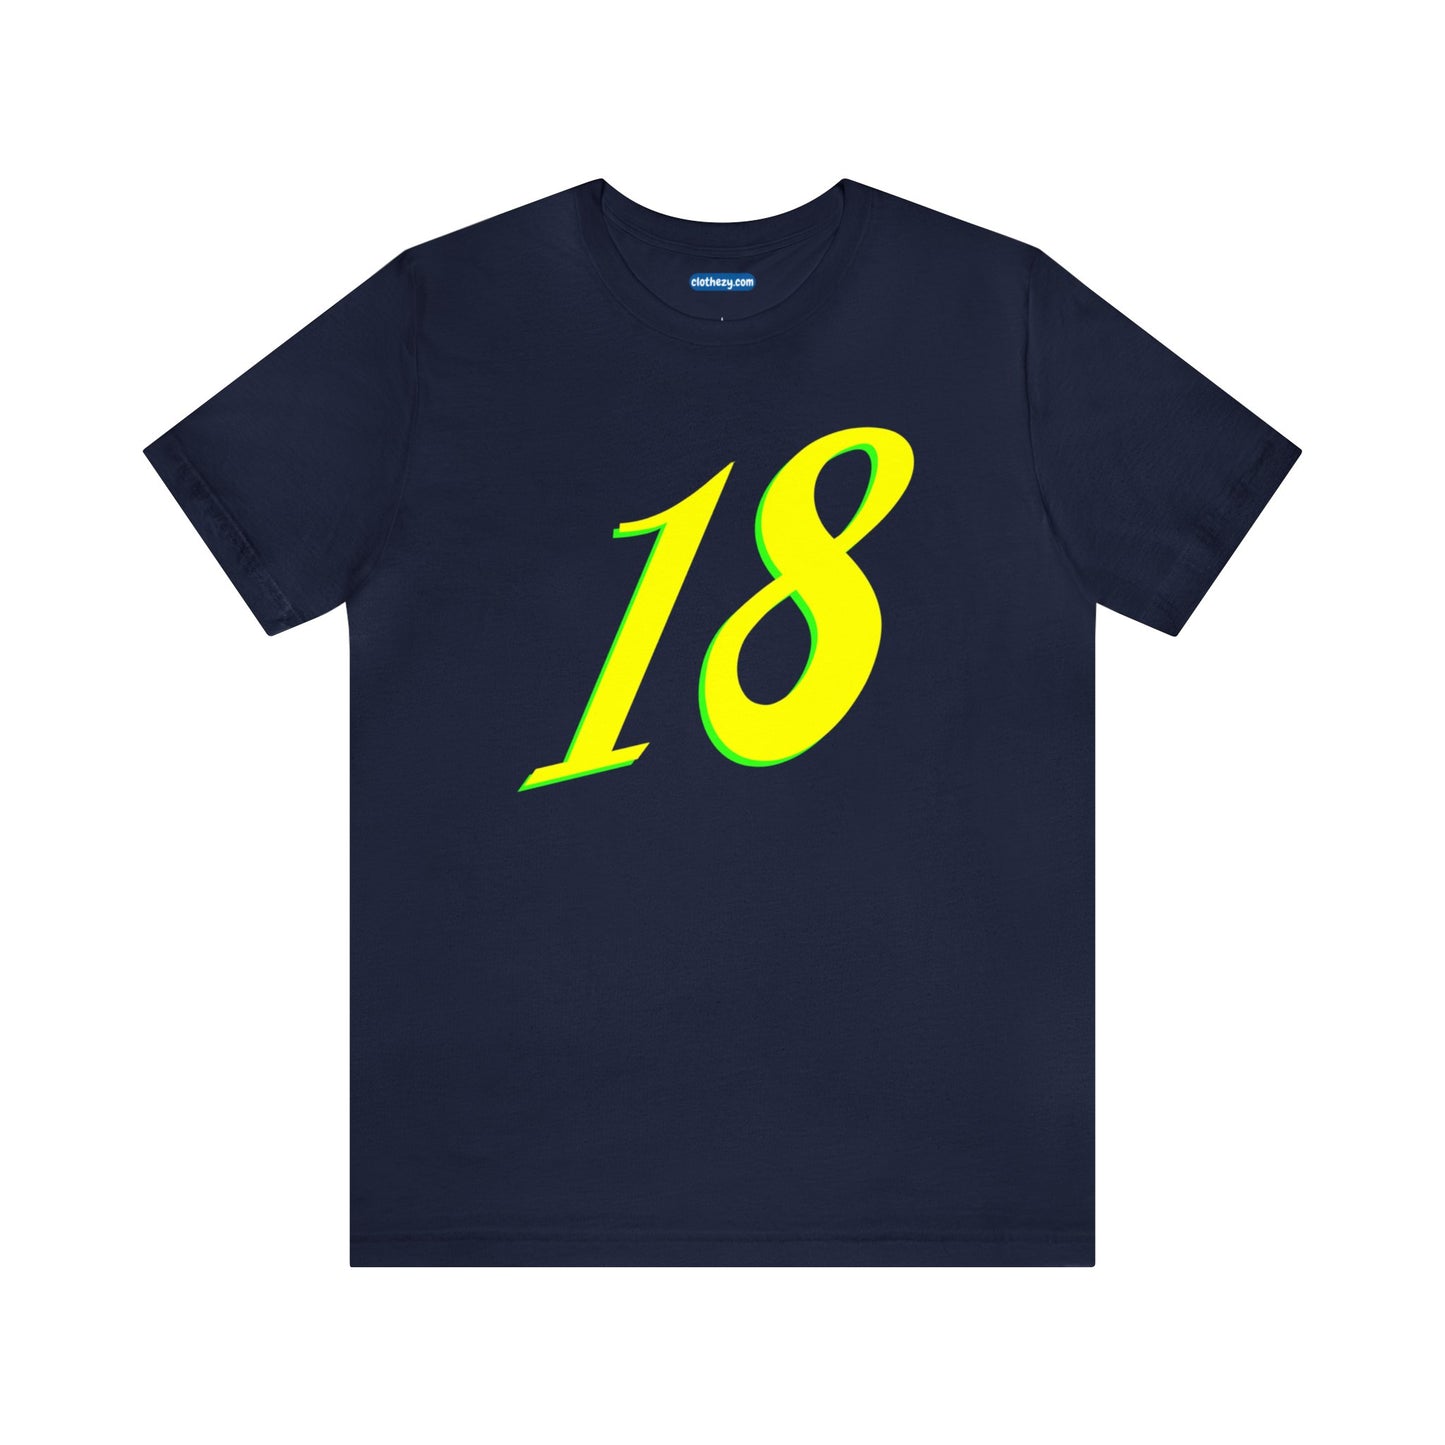 Number 18 Design - Soft Cotton Tee for birthdays and celebrations, Gift for friends and family, Multiple Options by clothezy.com in Navy Size Small - Buy Now